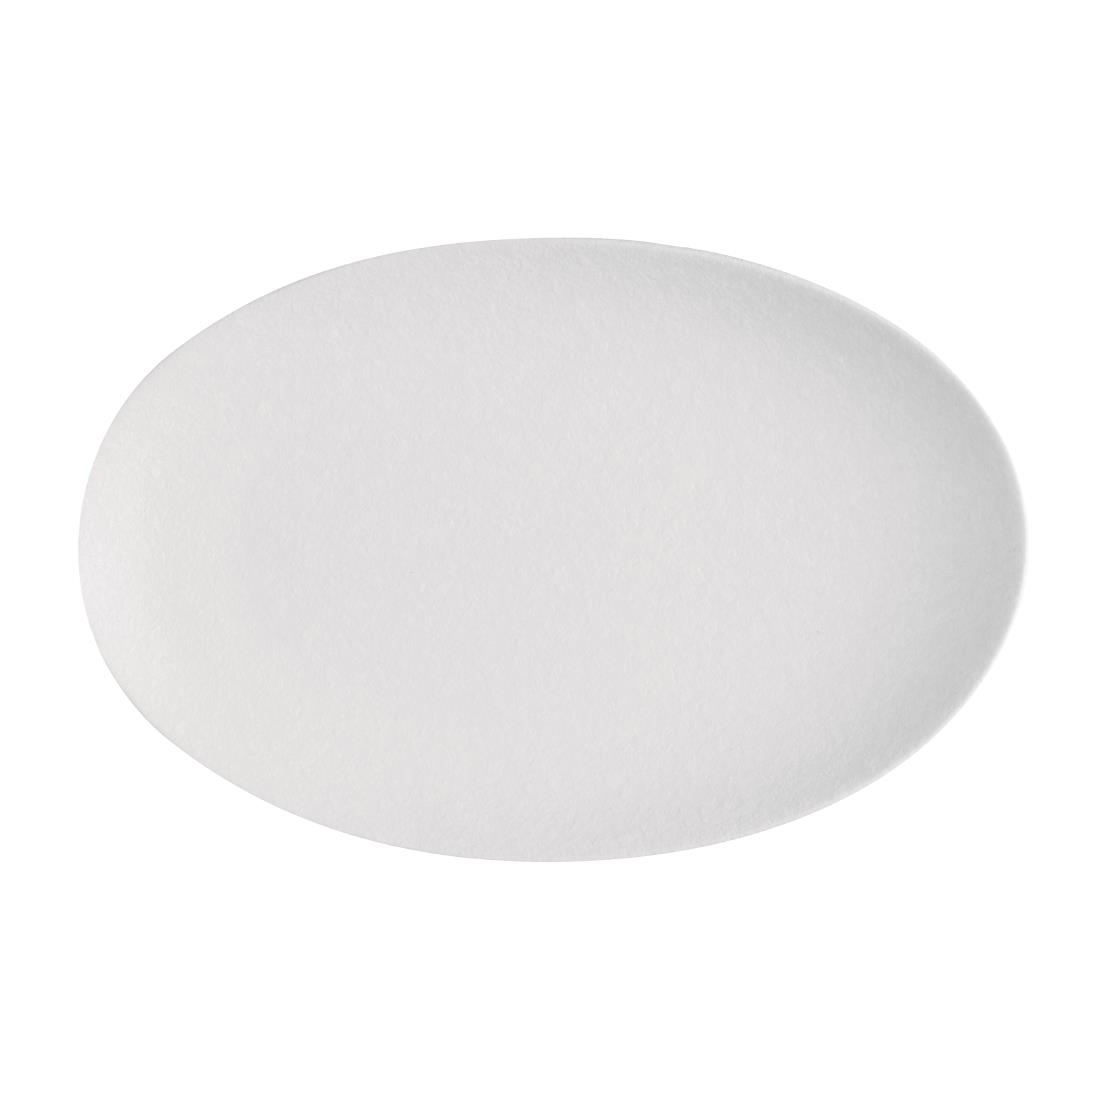 Olympia Salina Oval Plates 250mm (Pack of 4)